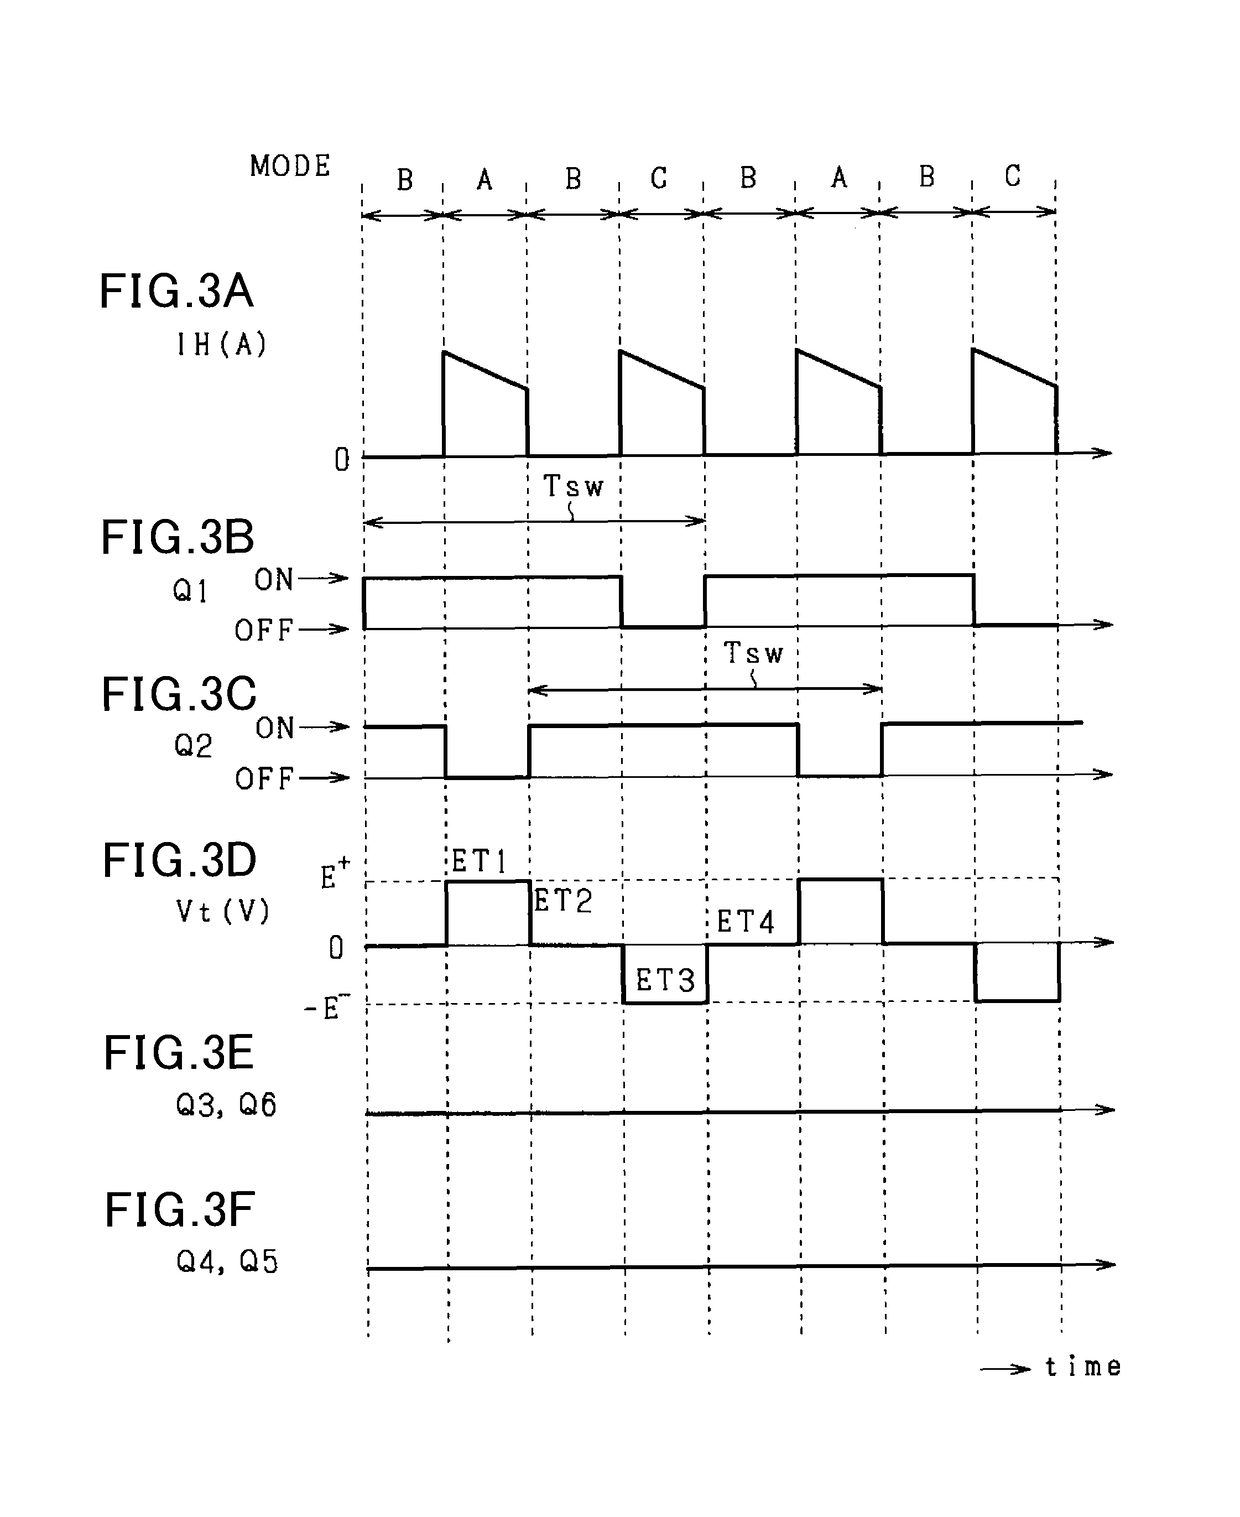 Control apparatus determining transformer magnetization in a DC/DC converter based on difference between primary and secondary currents